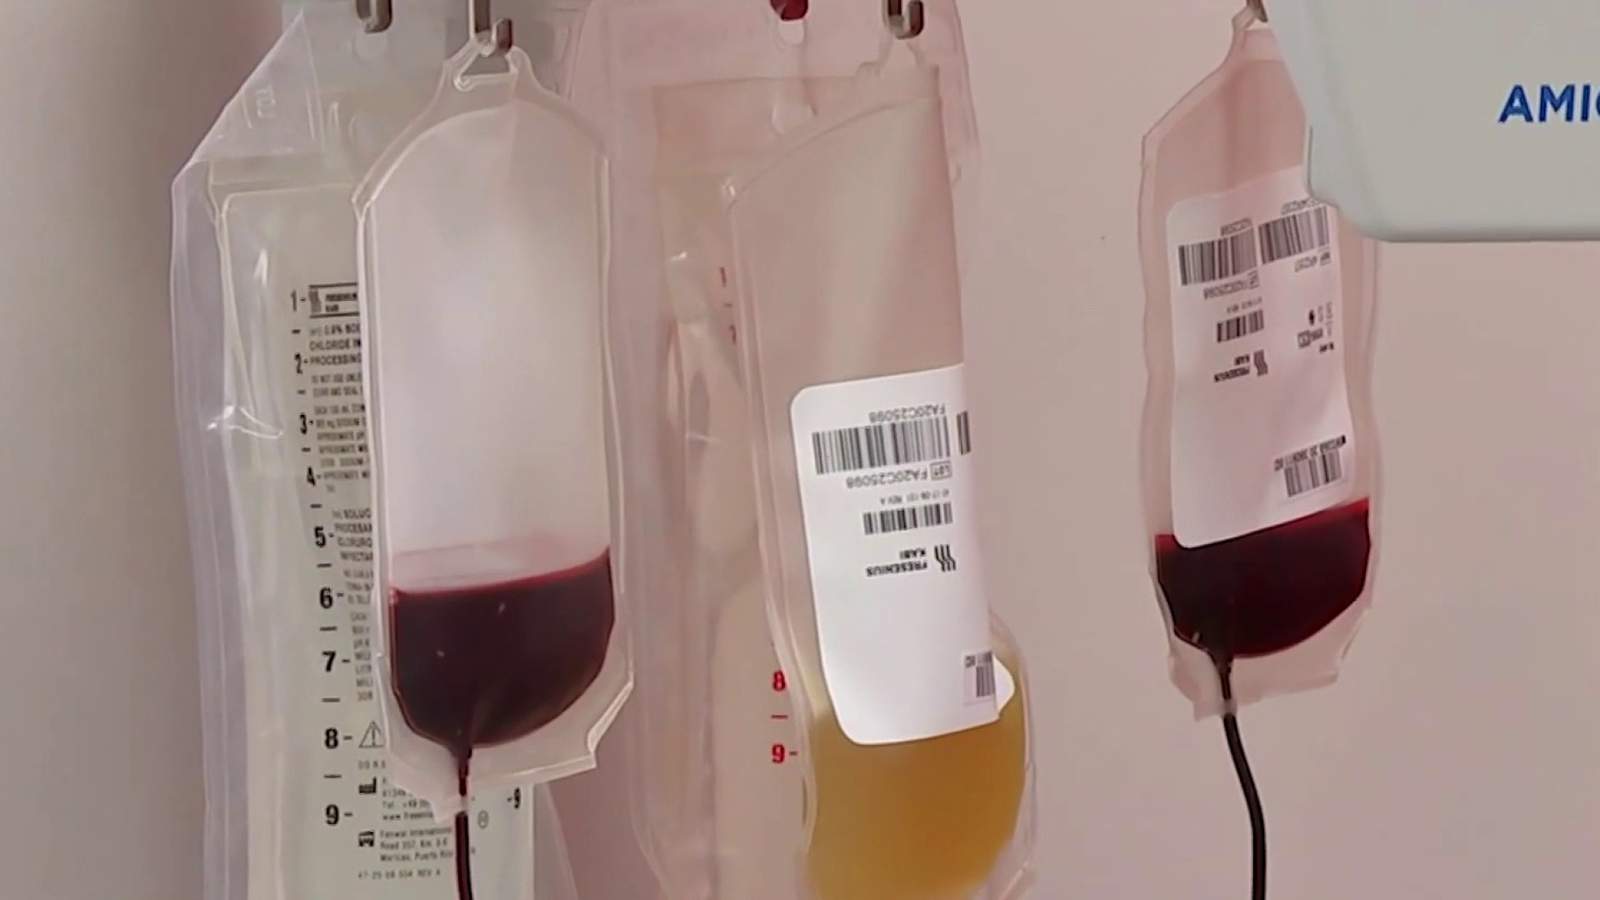 Urgent need: OneBlood calls for recovered COVID-19 patients to donate convalescent plasma